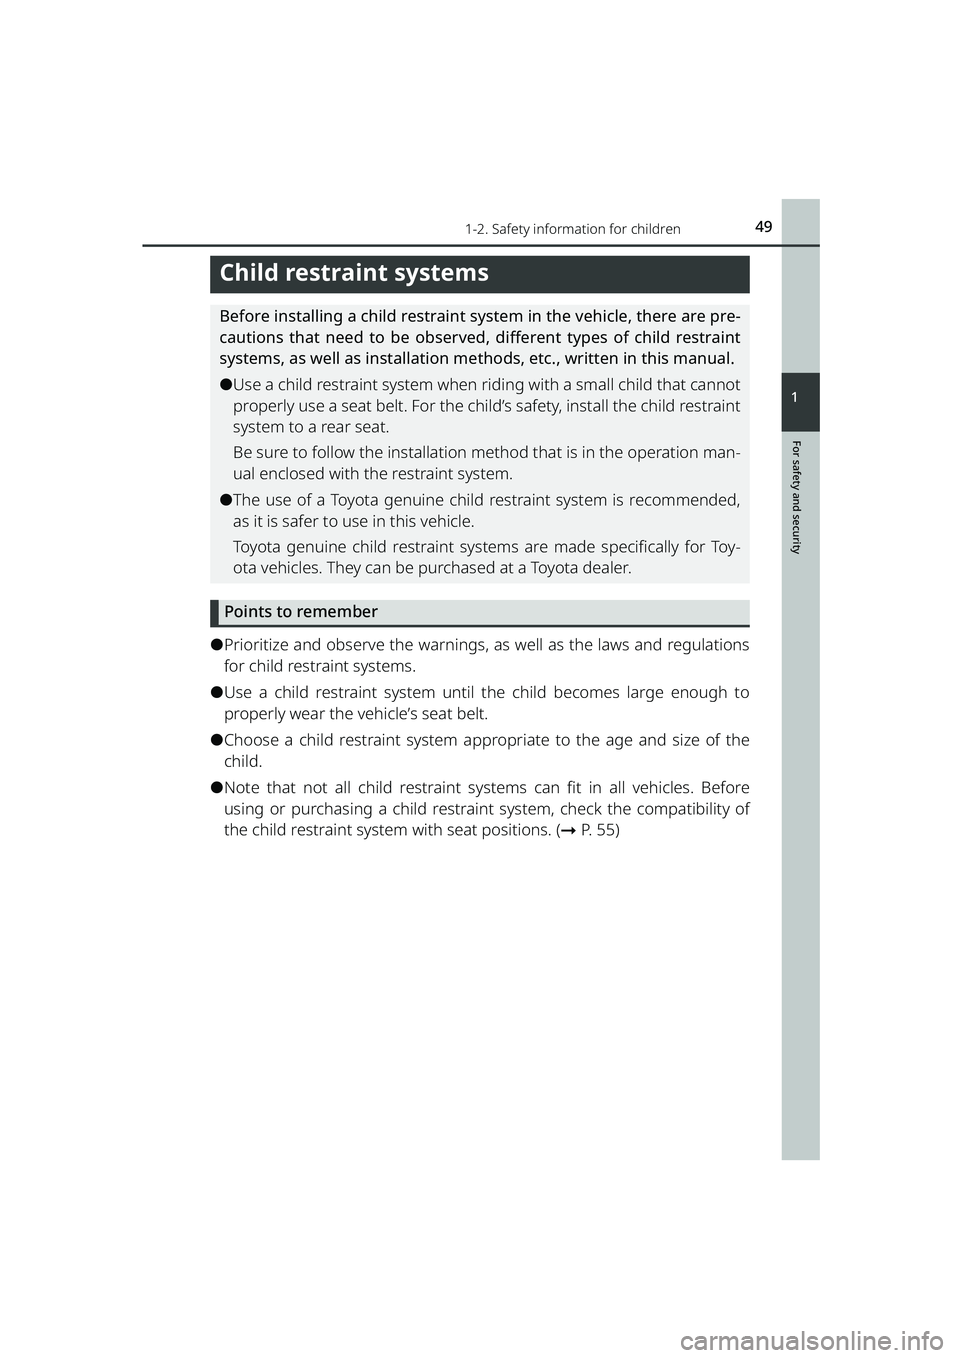 TOYOTA RAIZE 2023  Owners Manual 491-2. Safety information for children
RAIZE_OM_General_BZ358E
For safety and security
1
Child restraint systems
Before installing a child restraint system in the vehicle, there are pre-
cautions that